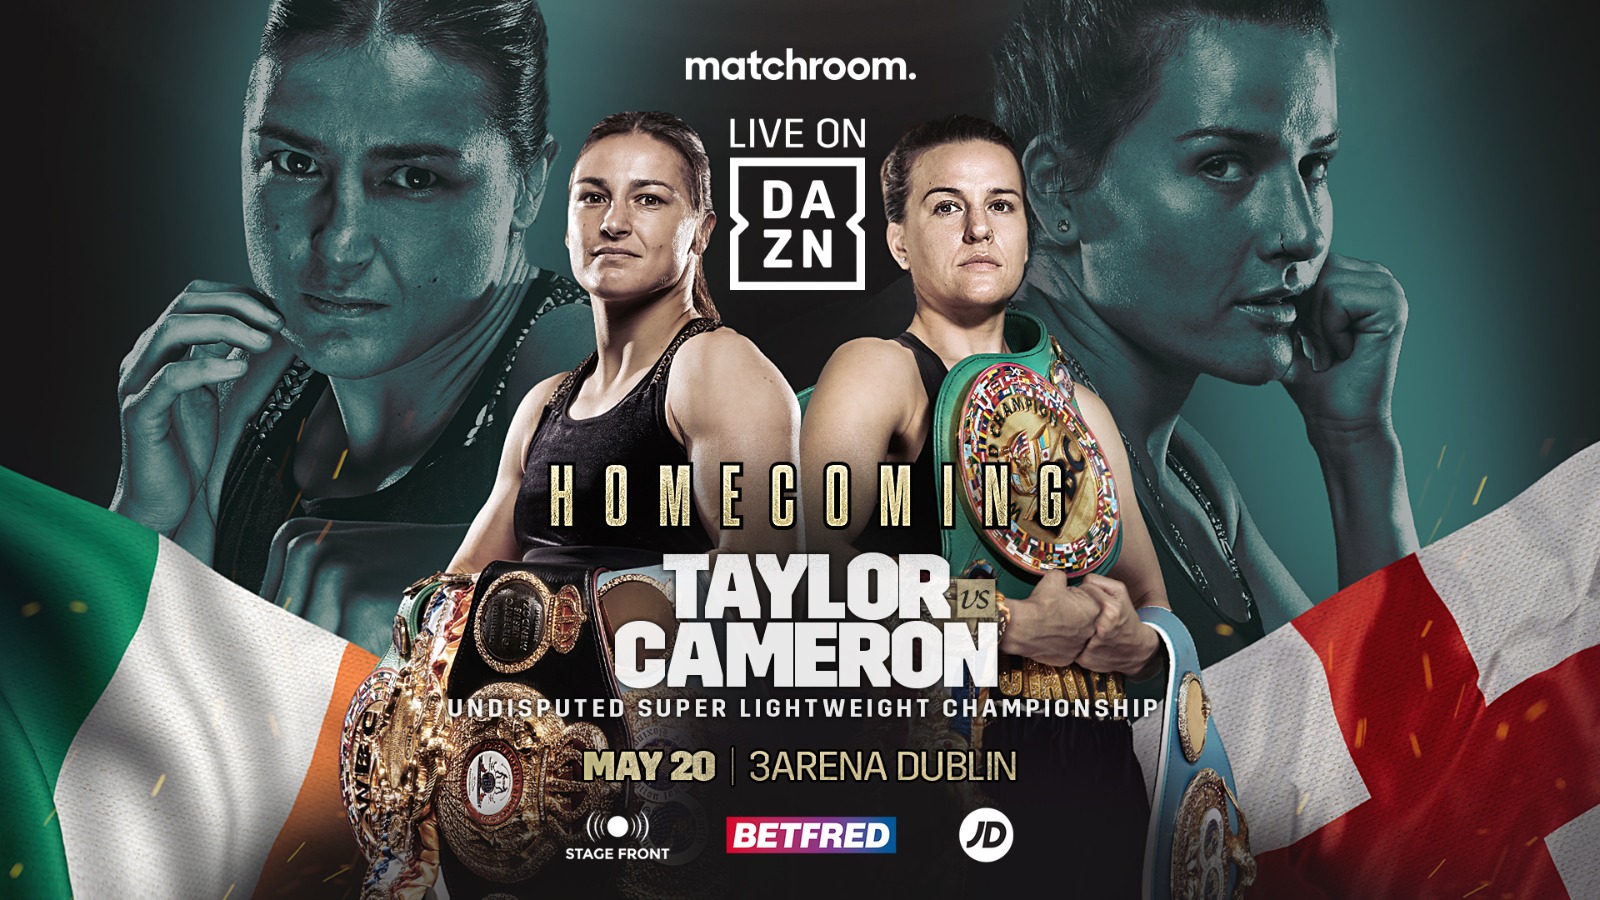 Katie Taylor To Face Chantelle Cameron For Undisputed Super Lightweight Championship